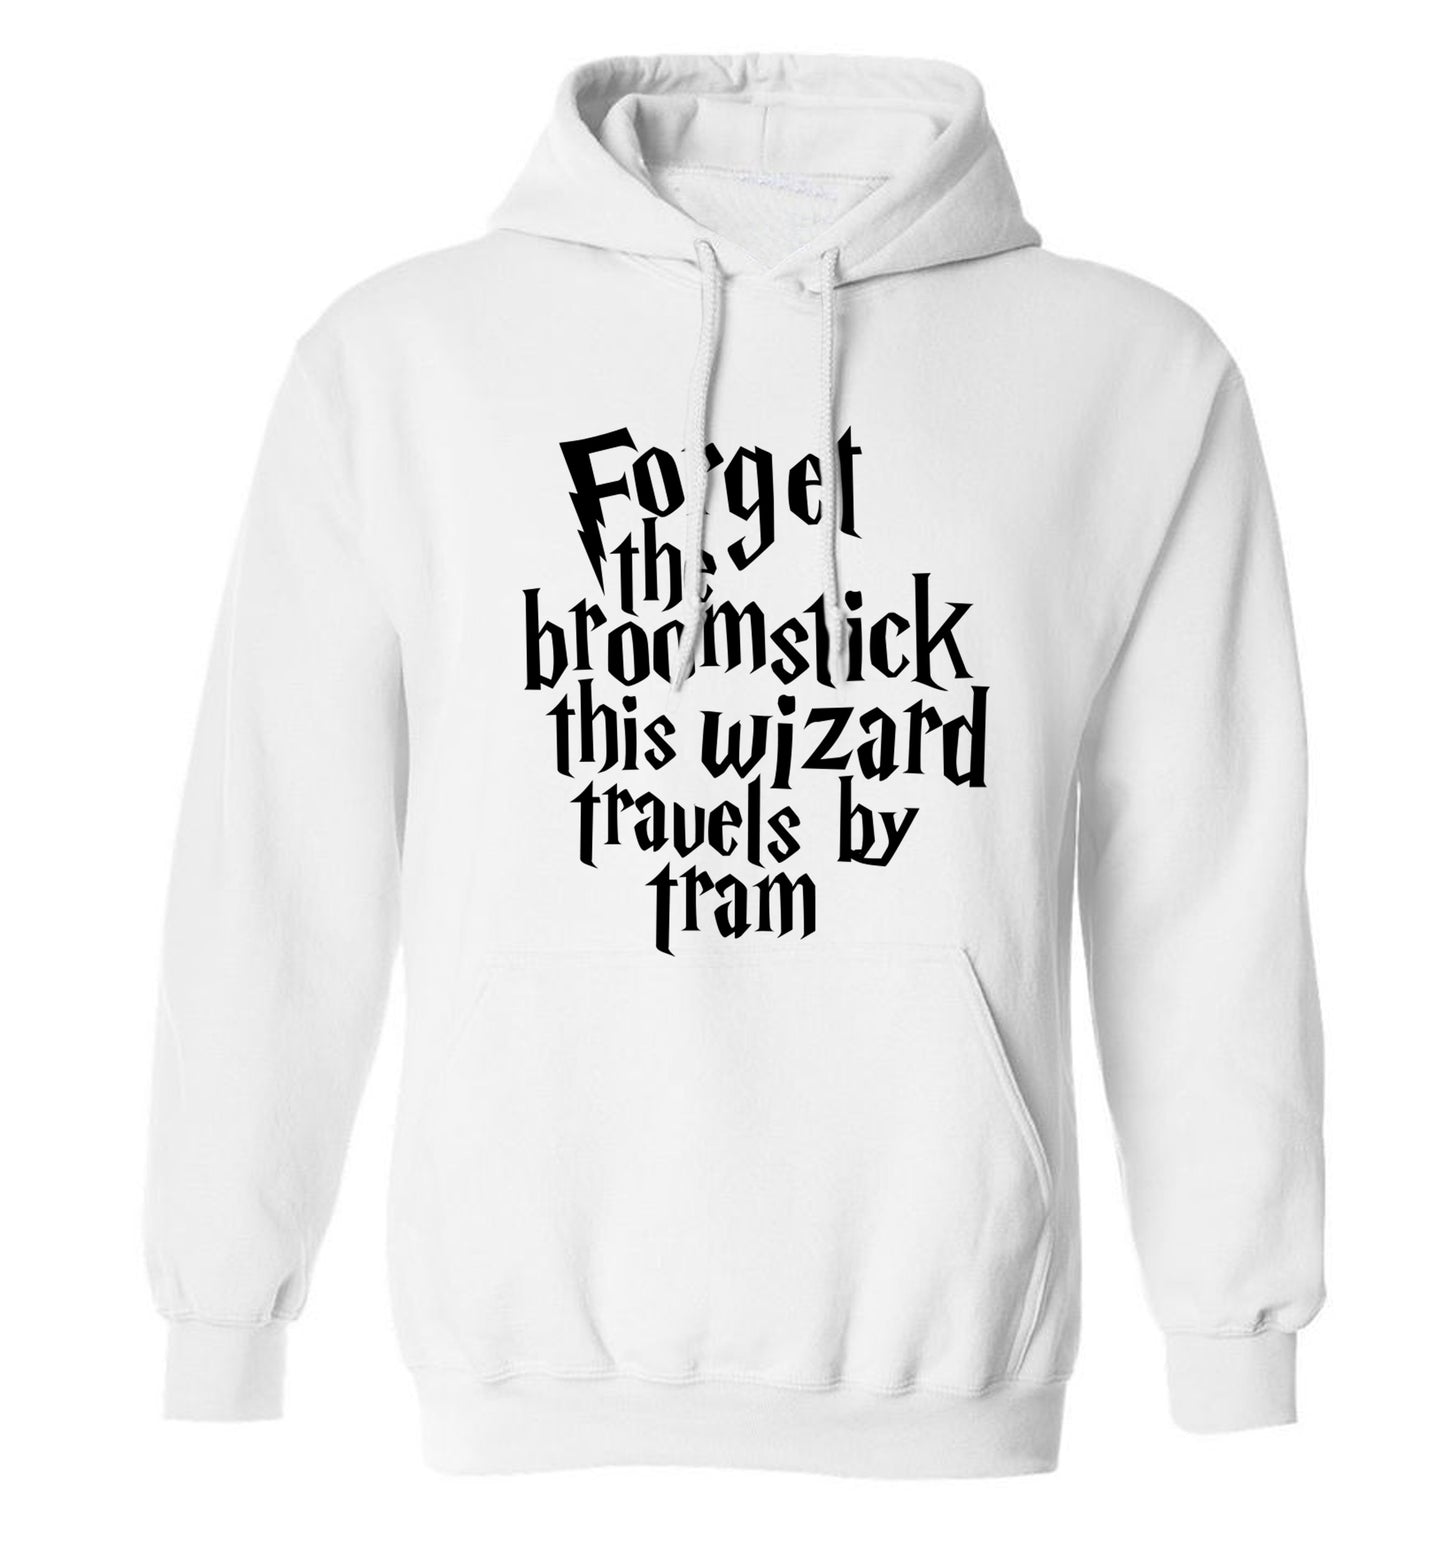 Forget the broomstick this wizard travels by tram adults unisexwhite hoodie 2XL